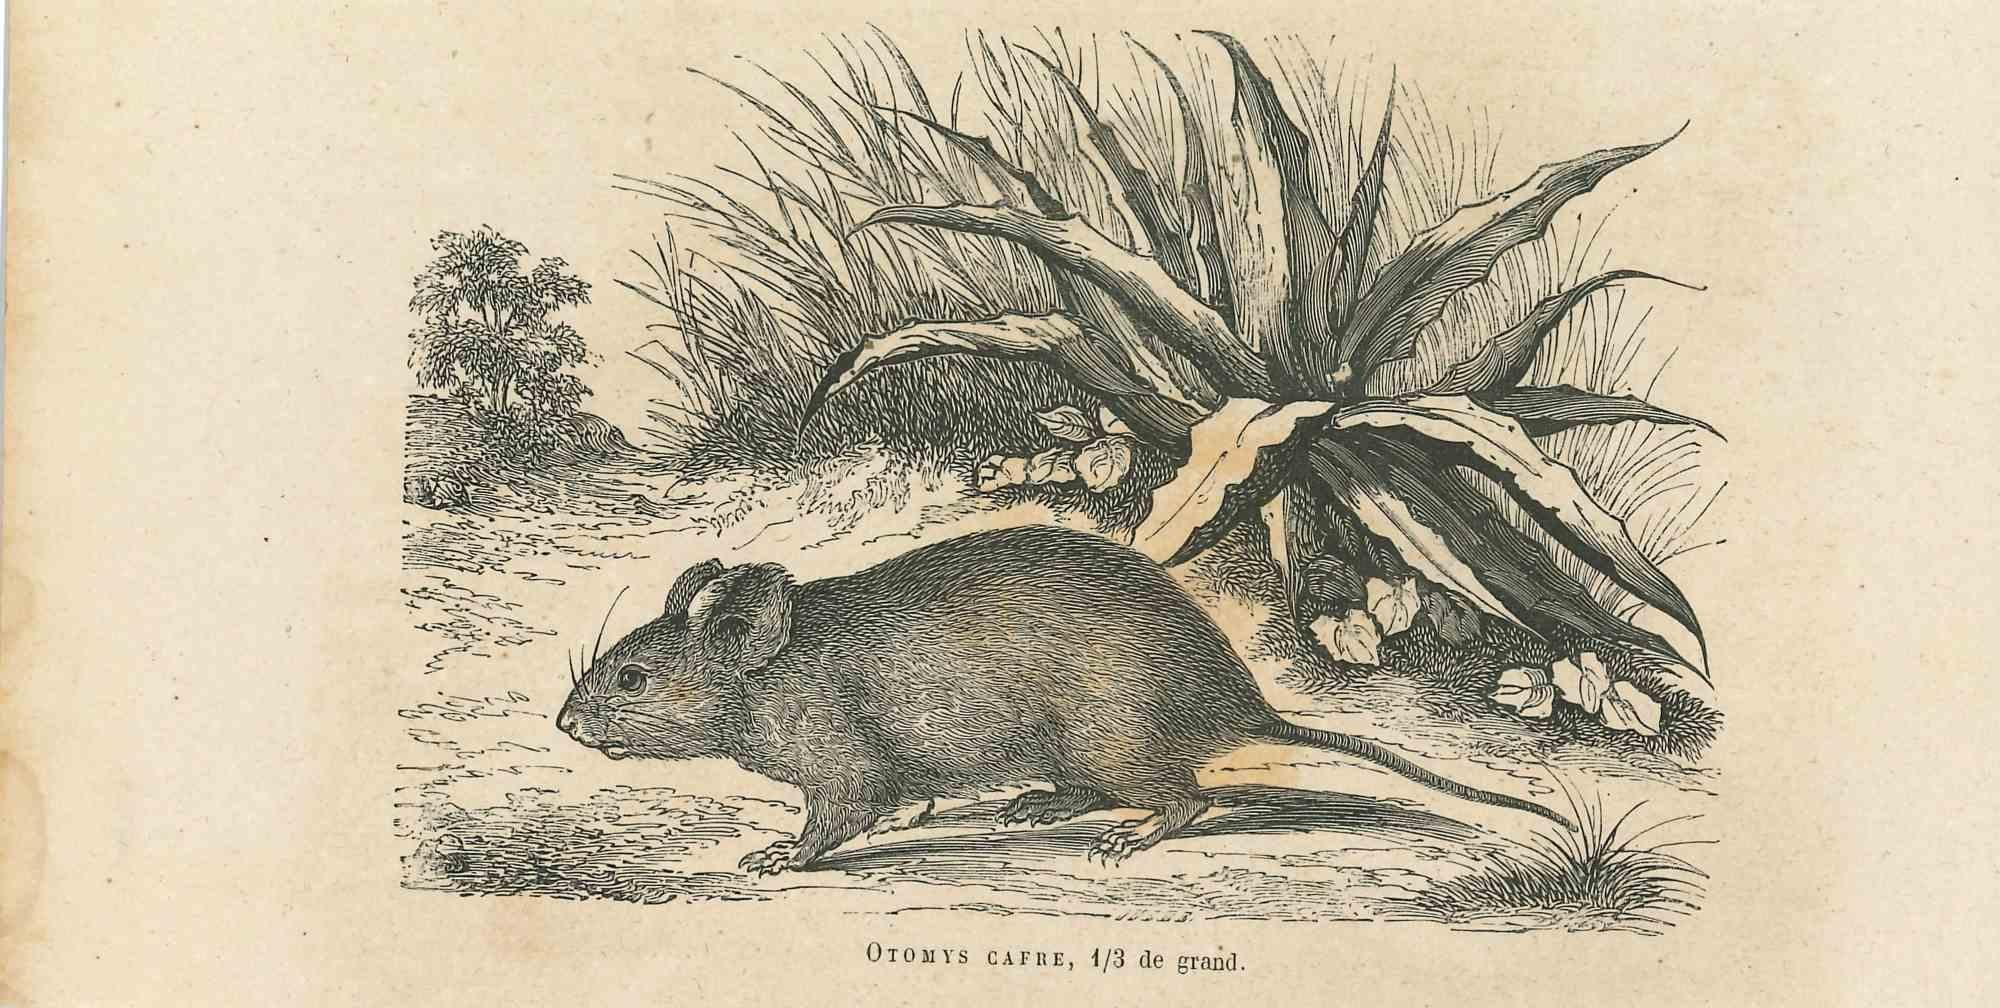 The Mouse is an original lithograph on ivory-colored paper, realized by Paul Gervais (1816-1879). The artwork is from The Series of "Les Trois Règnes de la Nature", and was published in 1854.

Good conditions.

Titled on the lower. With the notes on